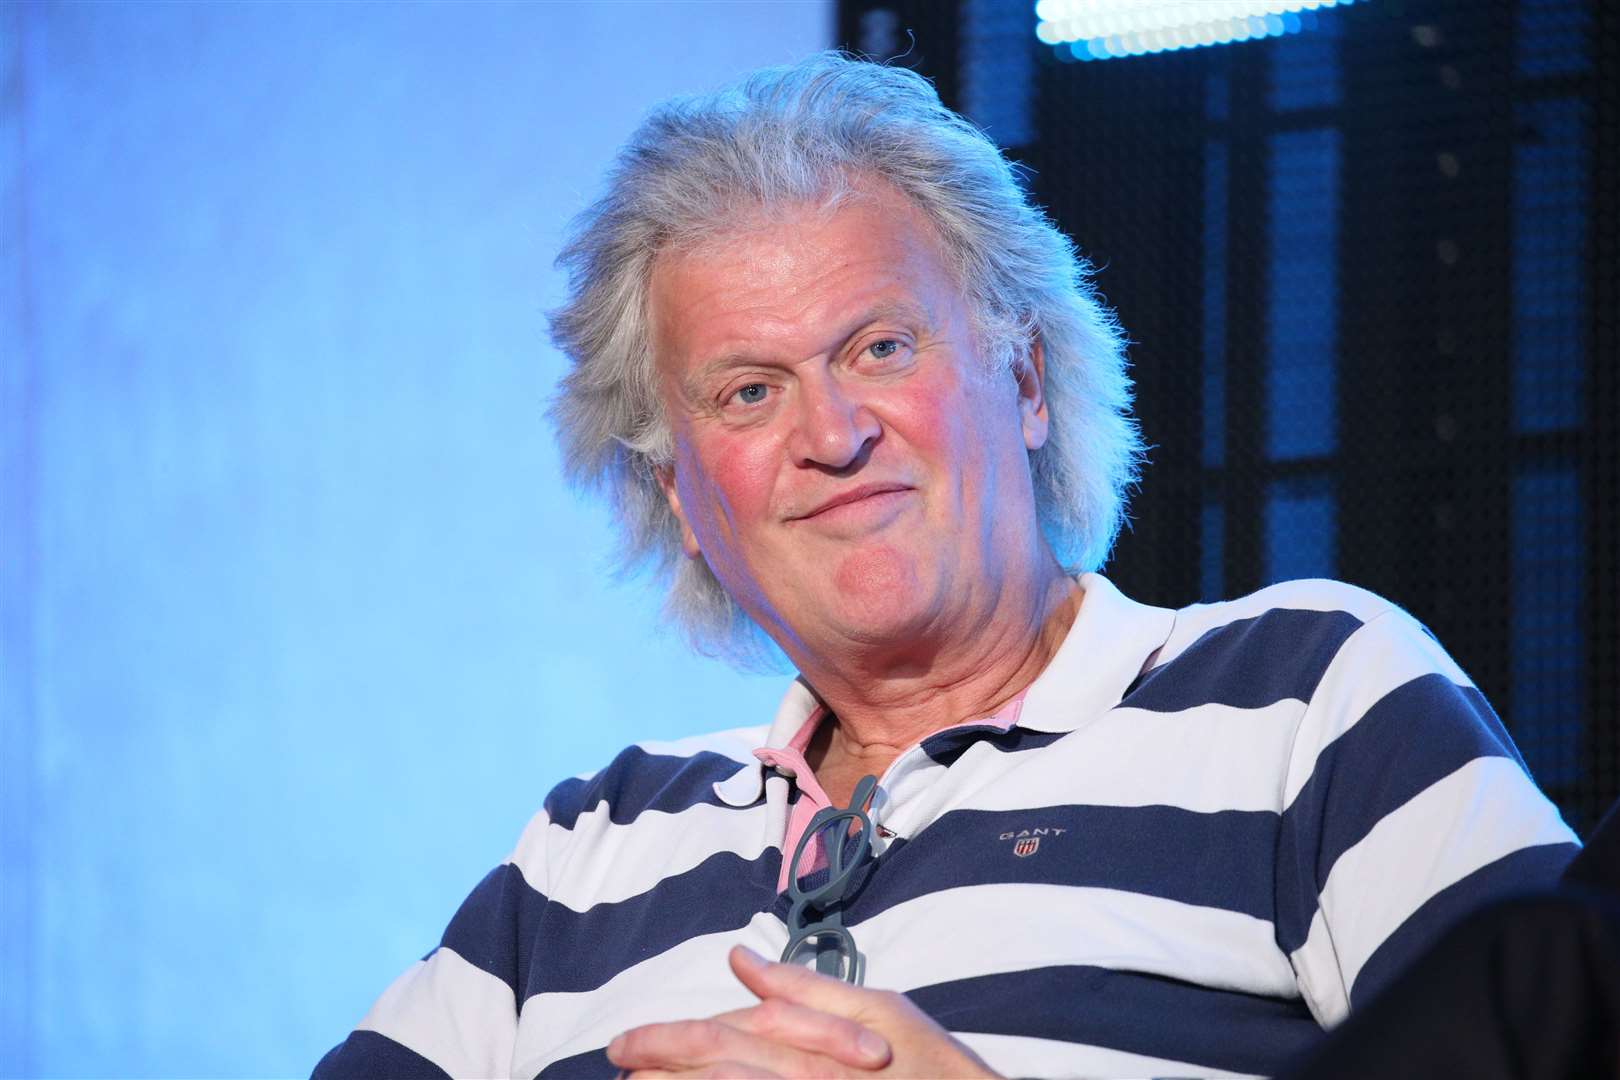 Wetherspoon founder Tim Martin said sales are set to be subdued after the Eat Out to Help Out scheme ends (Jonathan Brady/PA)